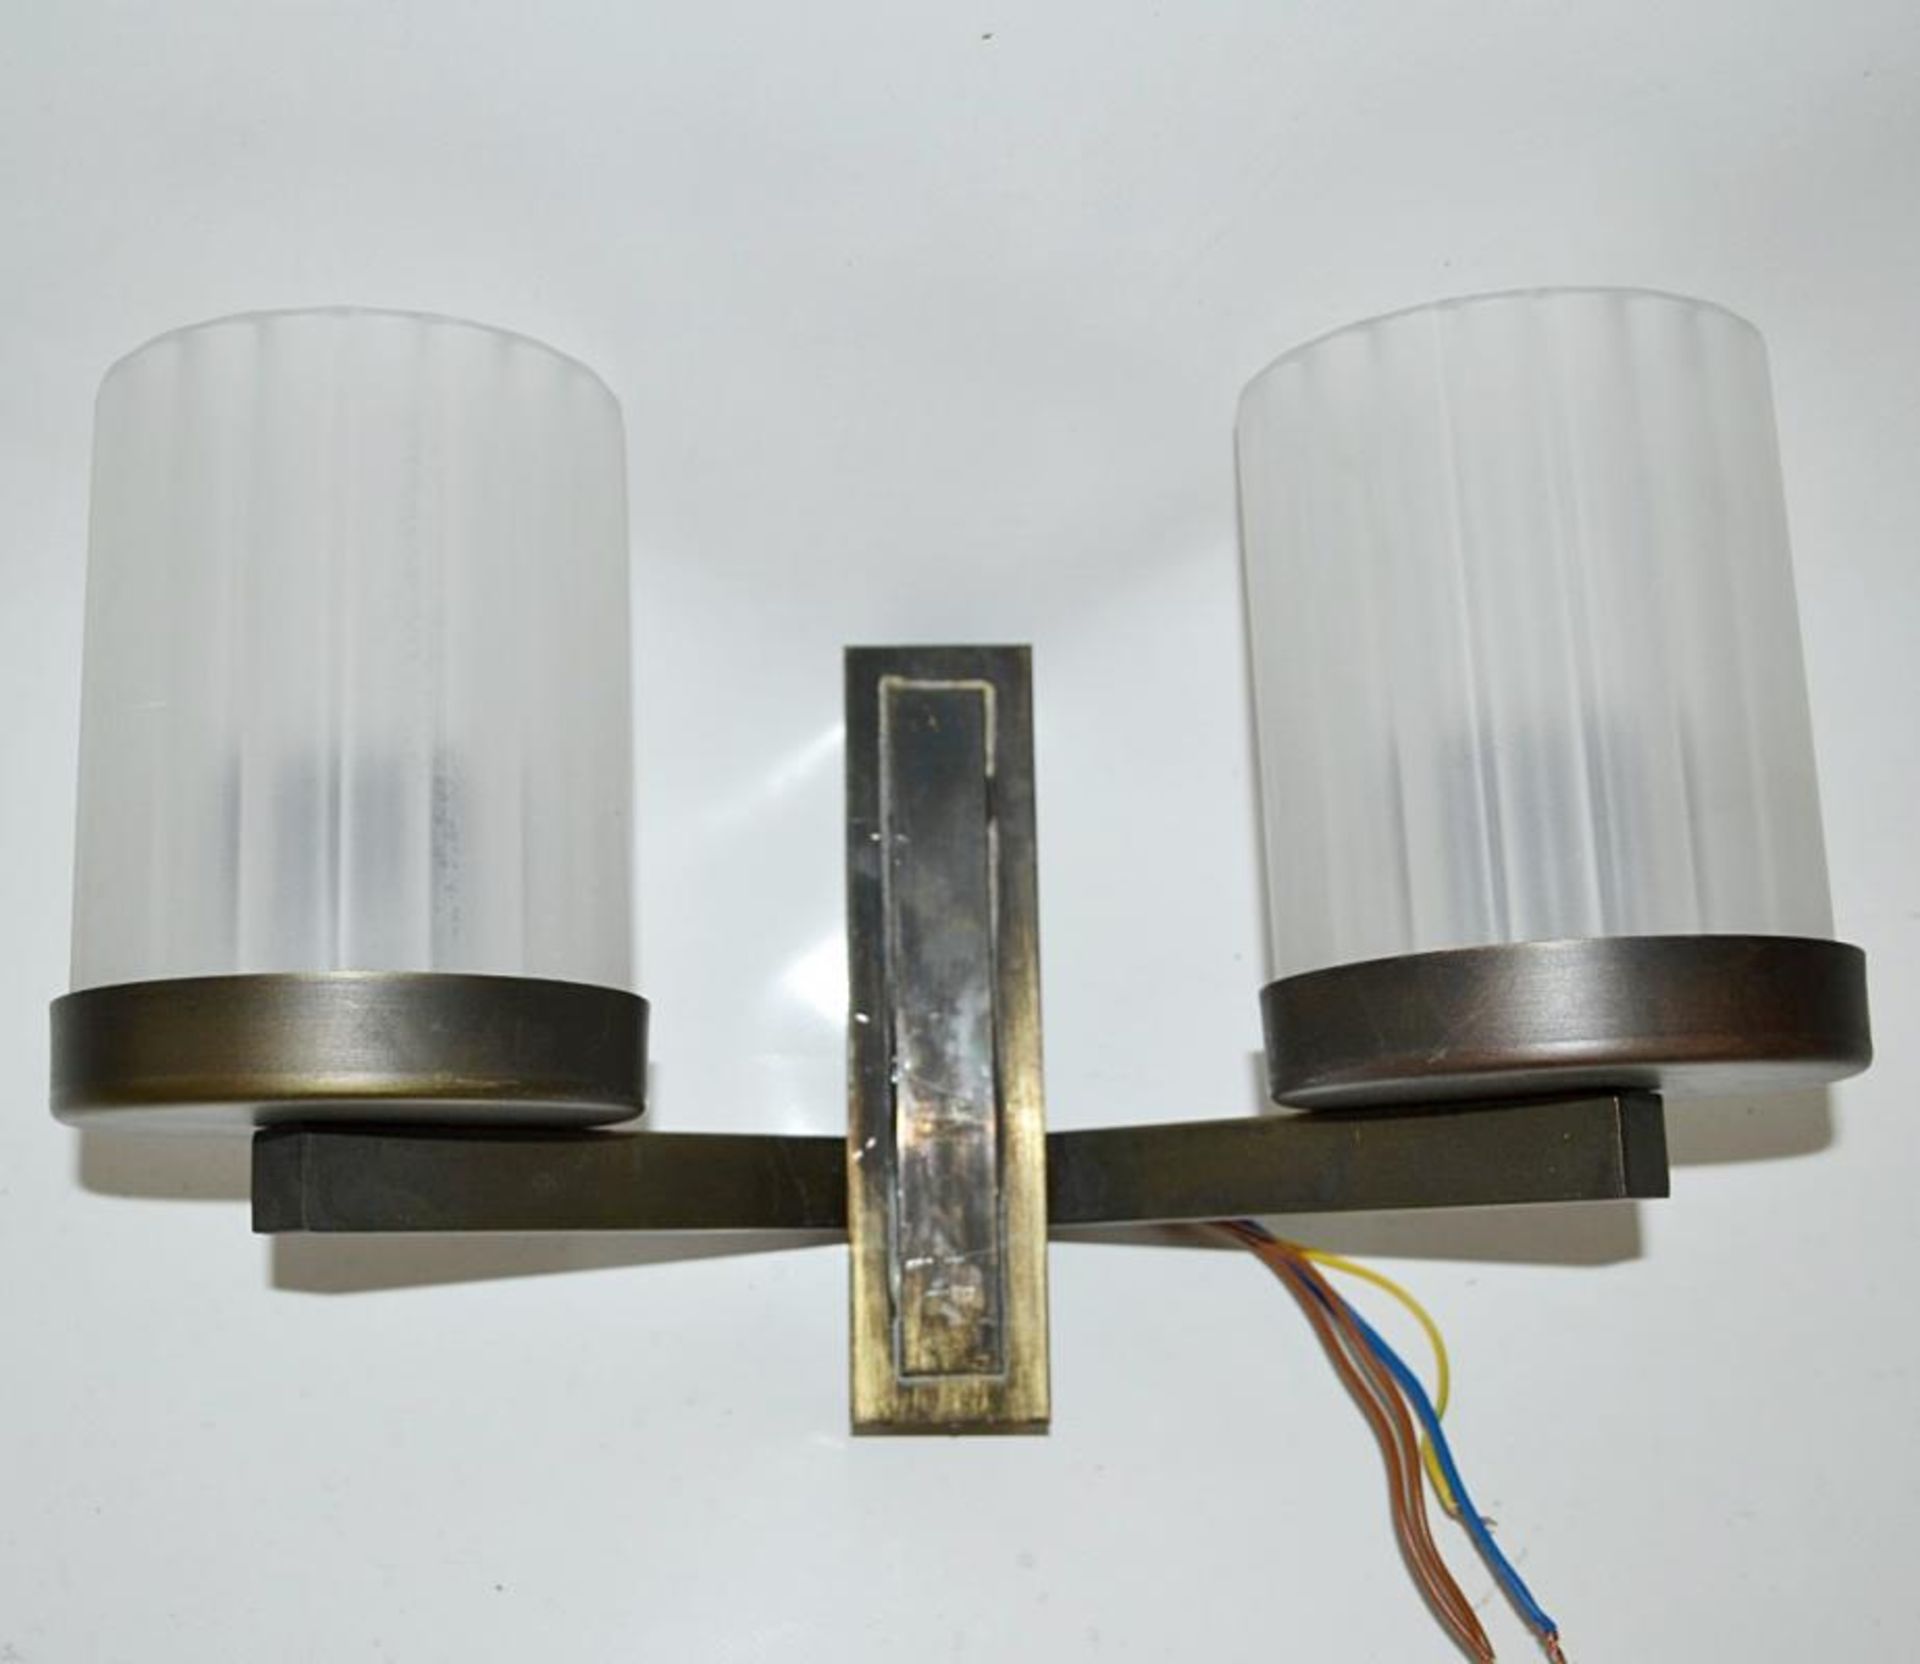 Pair Of Bespoke Art Deco Style Wall Mounted Twin-Sconce Light Fittings In Brass - Recently Removed F - Image 7 of 7